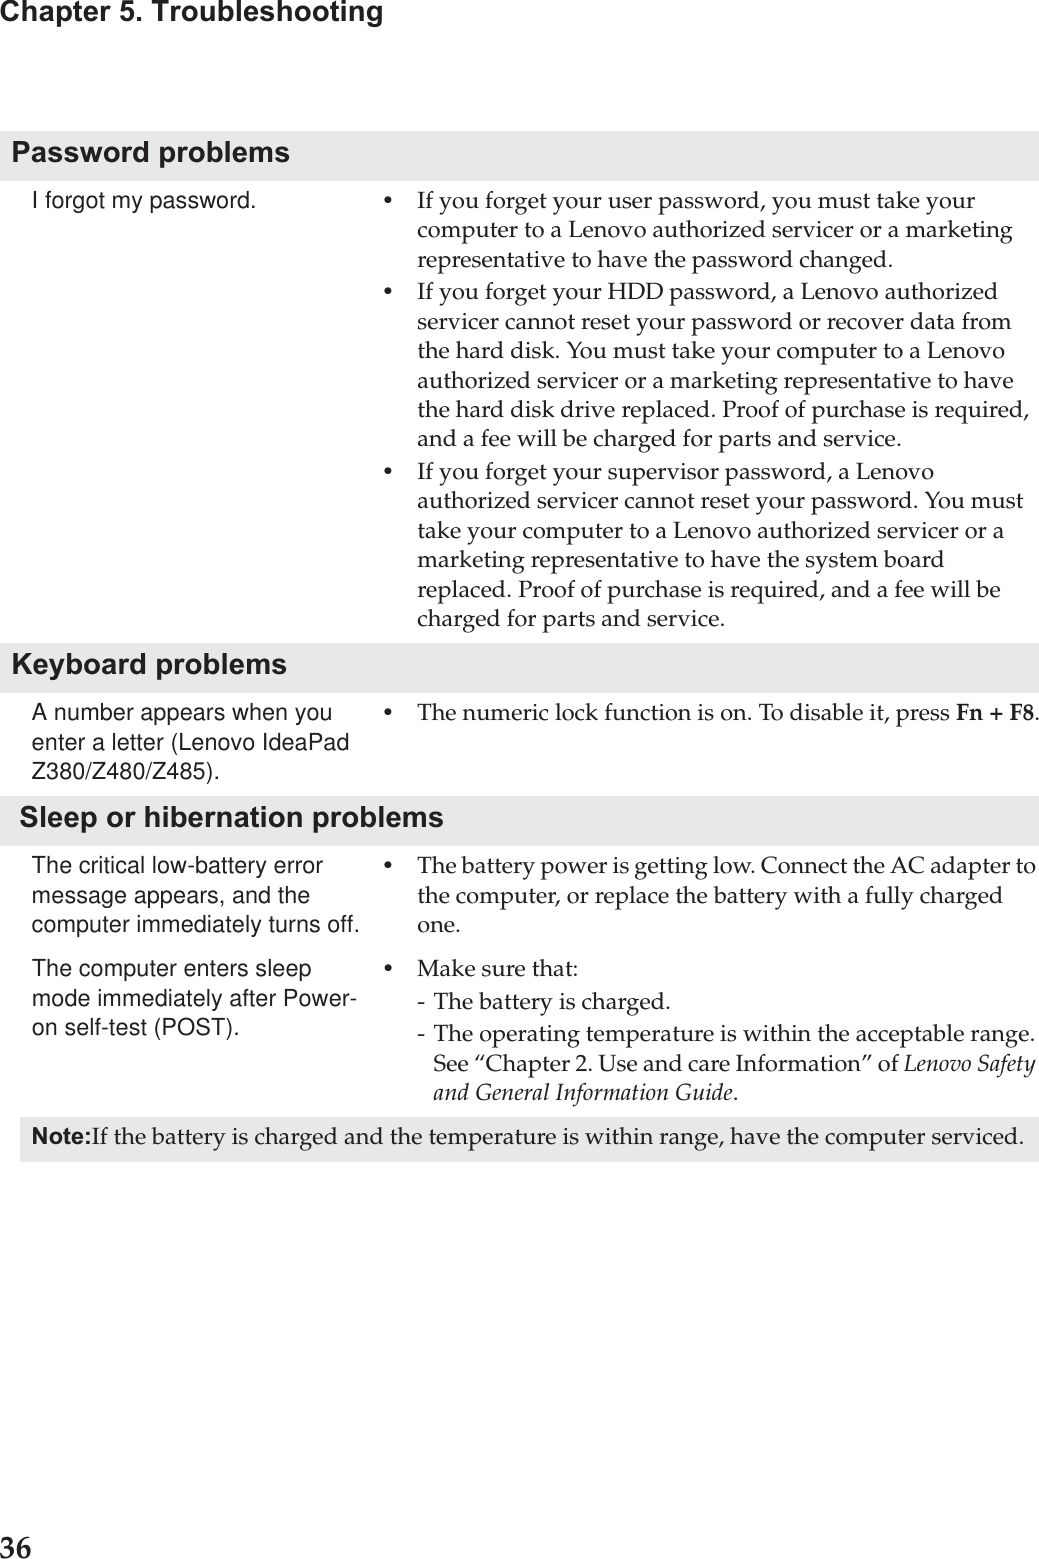 36Chapter 5. TroubleshootingPassword problemsI forgot my password. •If you forget your user password, you must take your computer to a Lenovo authorized servicer or a marketing representative to have the password changed. •If you forget your HDD password, a Lenovo authorized servicer cannot reset your password or recover data from the hard disk. You must take your computer to a Lenovo authorized servicer or a marketing representative to have the hard disk drive replaced. Proof of purchase is required, and a fee will be charged for parts and service. •If you forget your supervisor password, a Lenovo authorized servicer cannot reset your password. You must take your computer to a Lenovo authorized servicer or a marketing representative to have the system board replaced. Proof of purchase is required, and a fee will be charged for parts and service.Keyboard problemsA number appears when you enter a letter (Lenovo IdeaPad Z380/Z480/Z485).•The numeric lock function is on. To disable it, press Fn + F8. Sleep or hibernation problemsThe critical low-battery error message appears, and the computer immediately turns off.•The battery power is getting low. Connect the AC adapter to the computer, or replace the battery with a fully charged one.The computer enters sleep mode immediately after Power-on self-test (POST). •Make sure that: - The battery is charged.- The operating temperature is within the acceptable range. See “Chapter 2. Use and care Information” of Lenovo Safety and General Information Guide.Note:If the battery is charged and the temperature is within range, have the computer serviced.